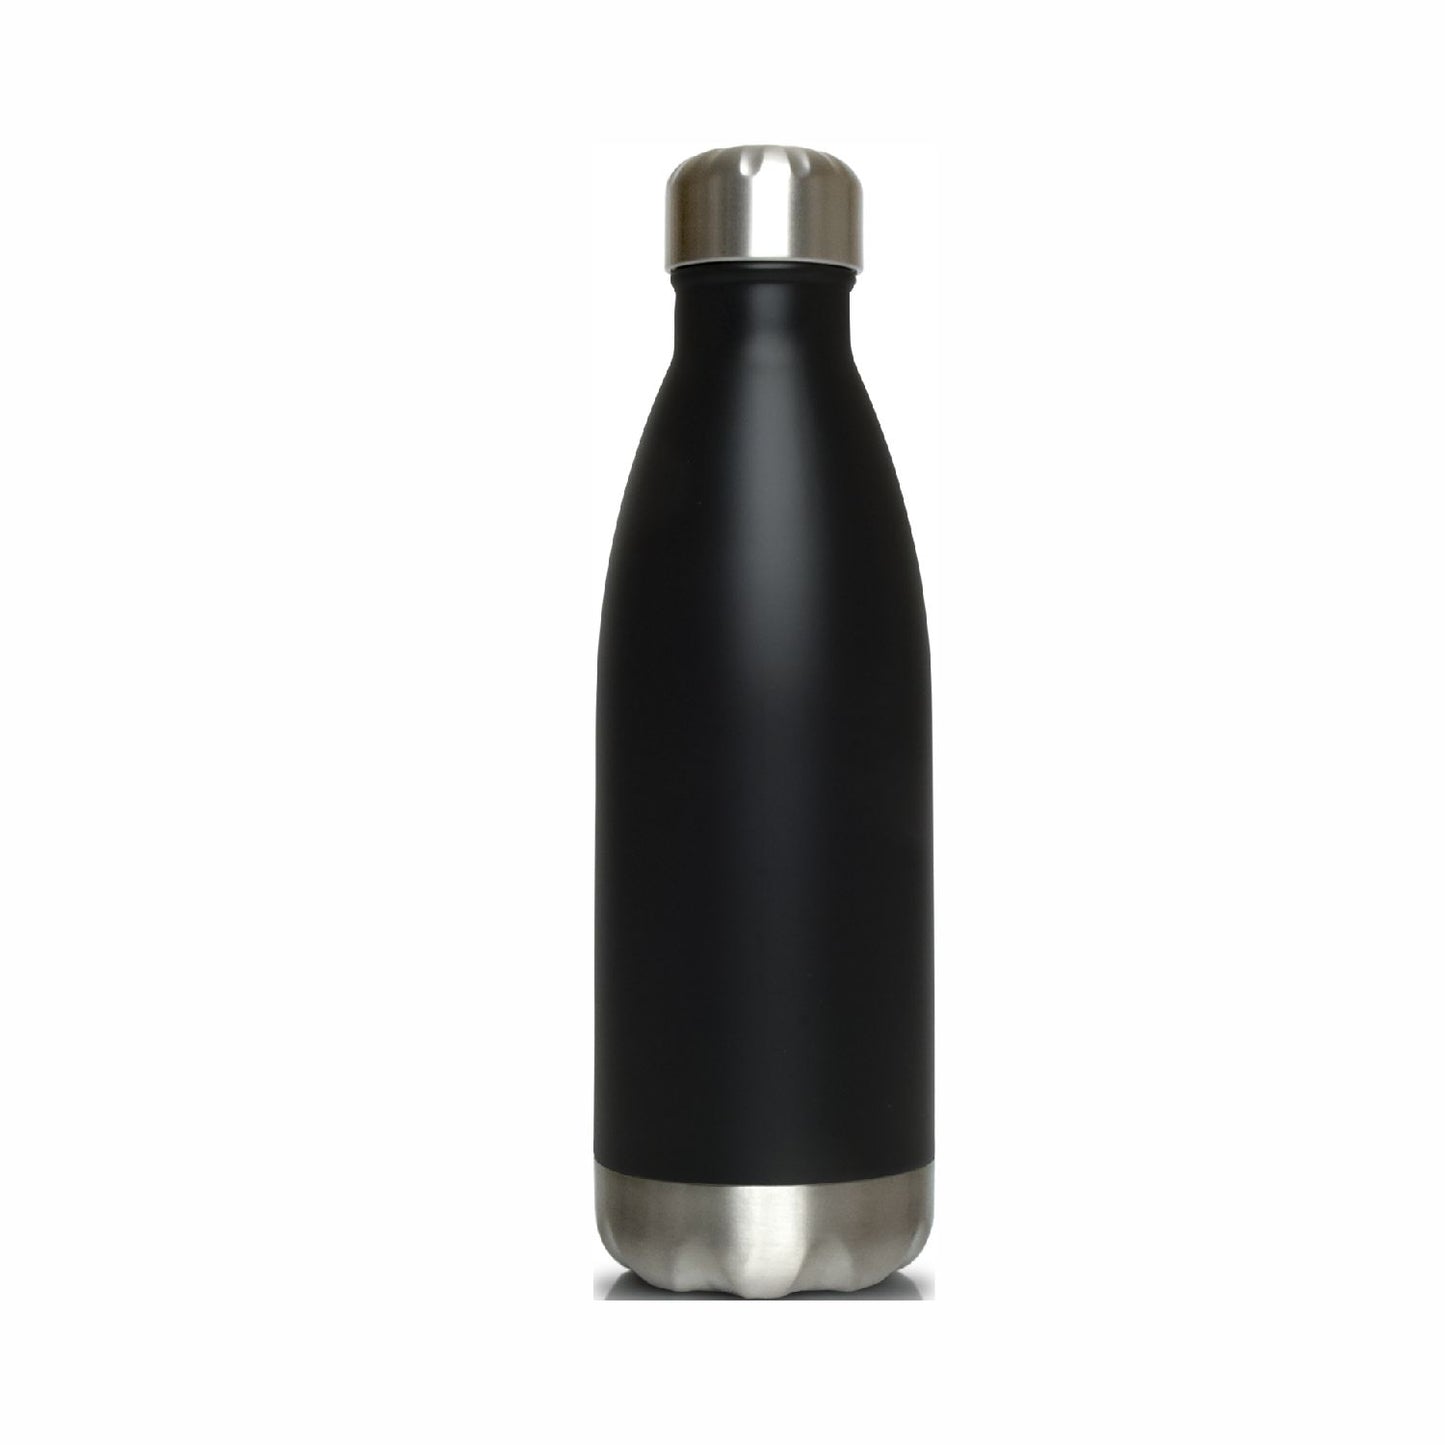 Force Insulated Bottle - 17oz